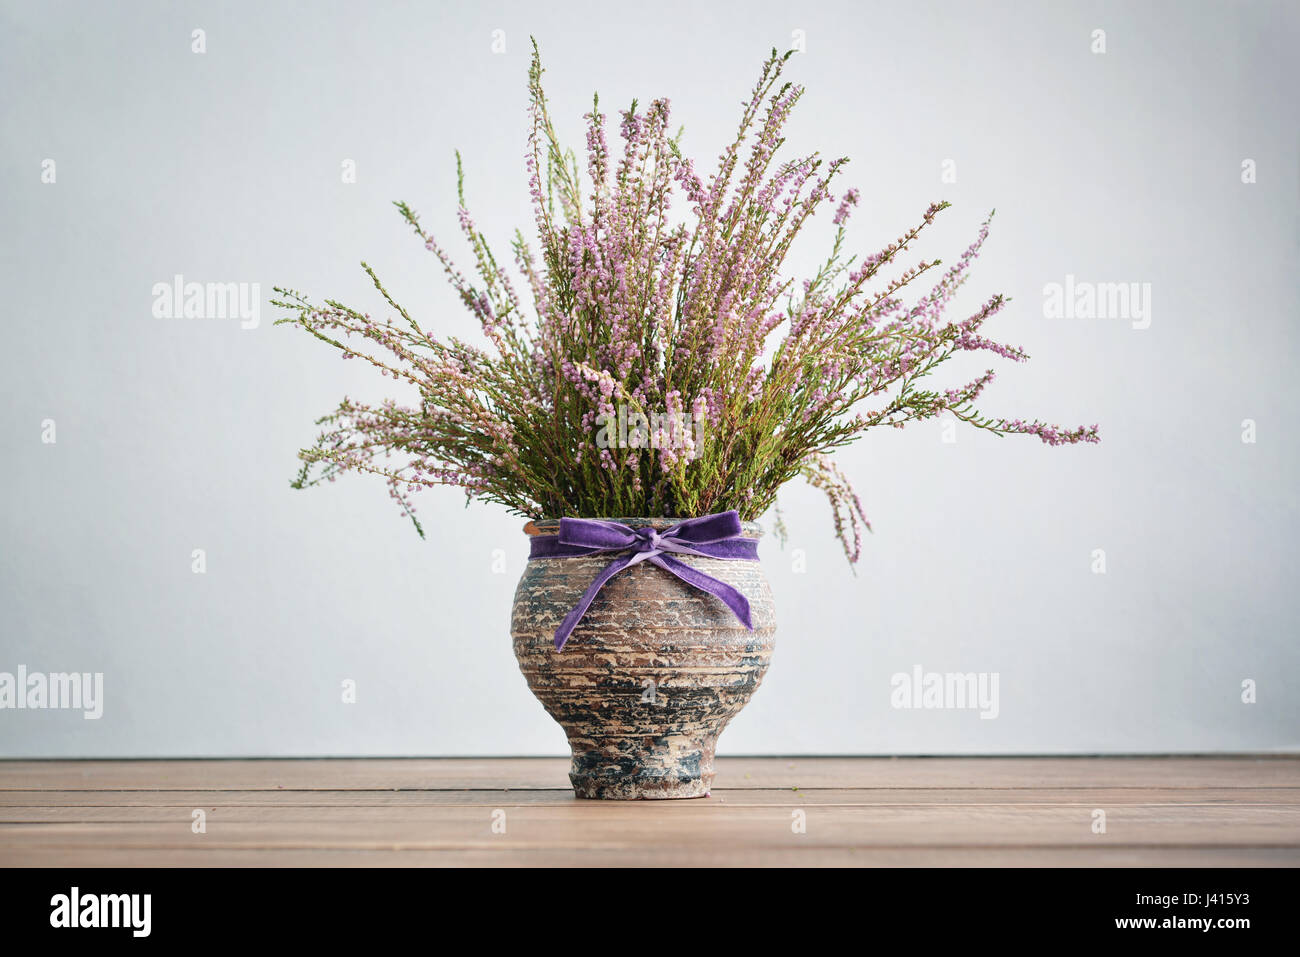 Calluna vulgaris (known as common heather, ling, or simply heather) in vase on blue  background Stock Photo